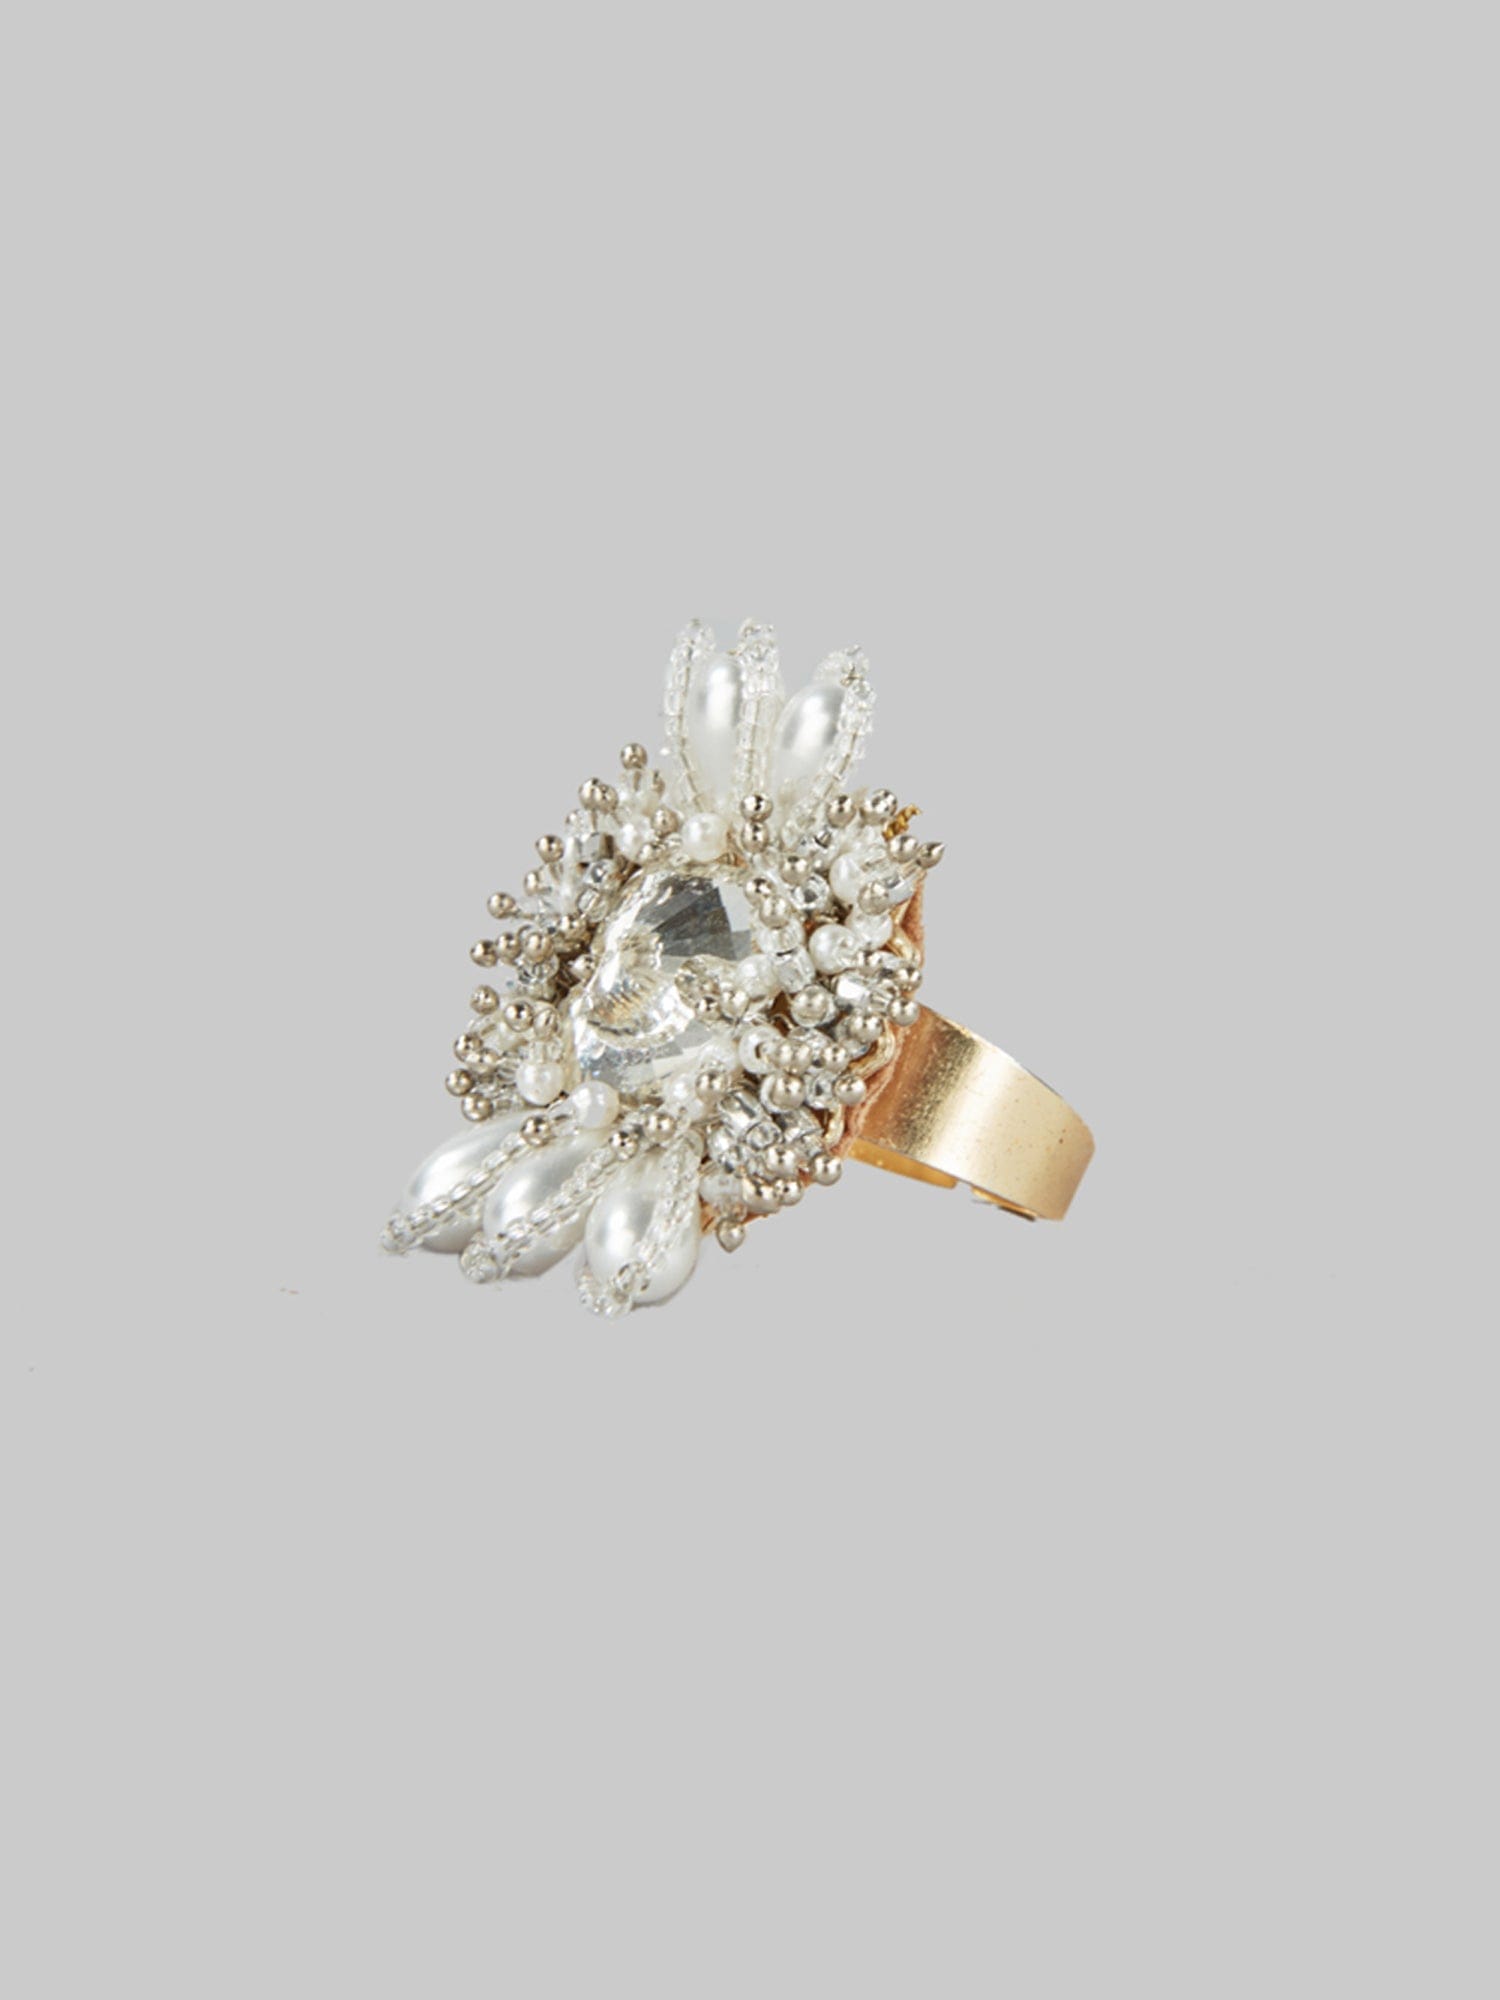 EVANIA SILVER RING - House of D’oro